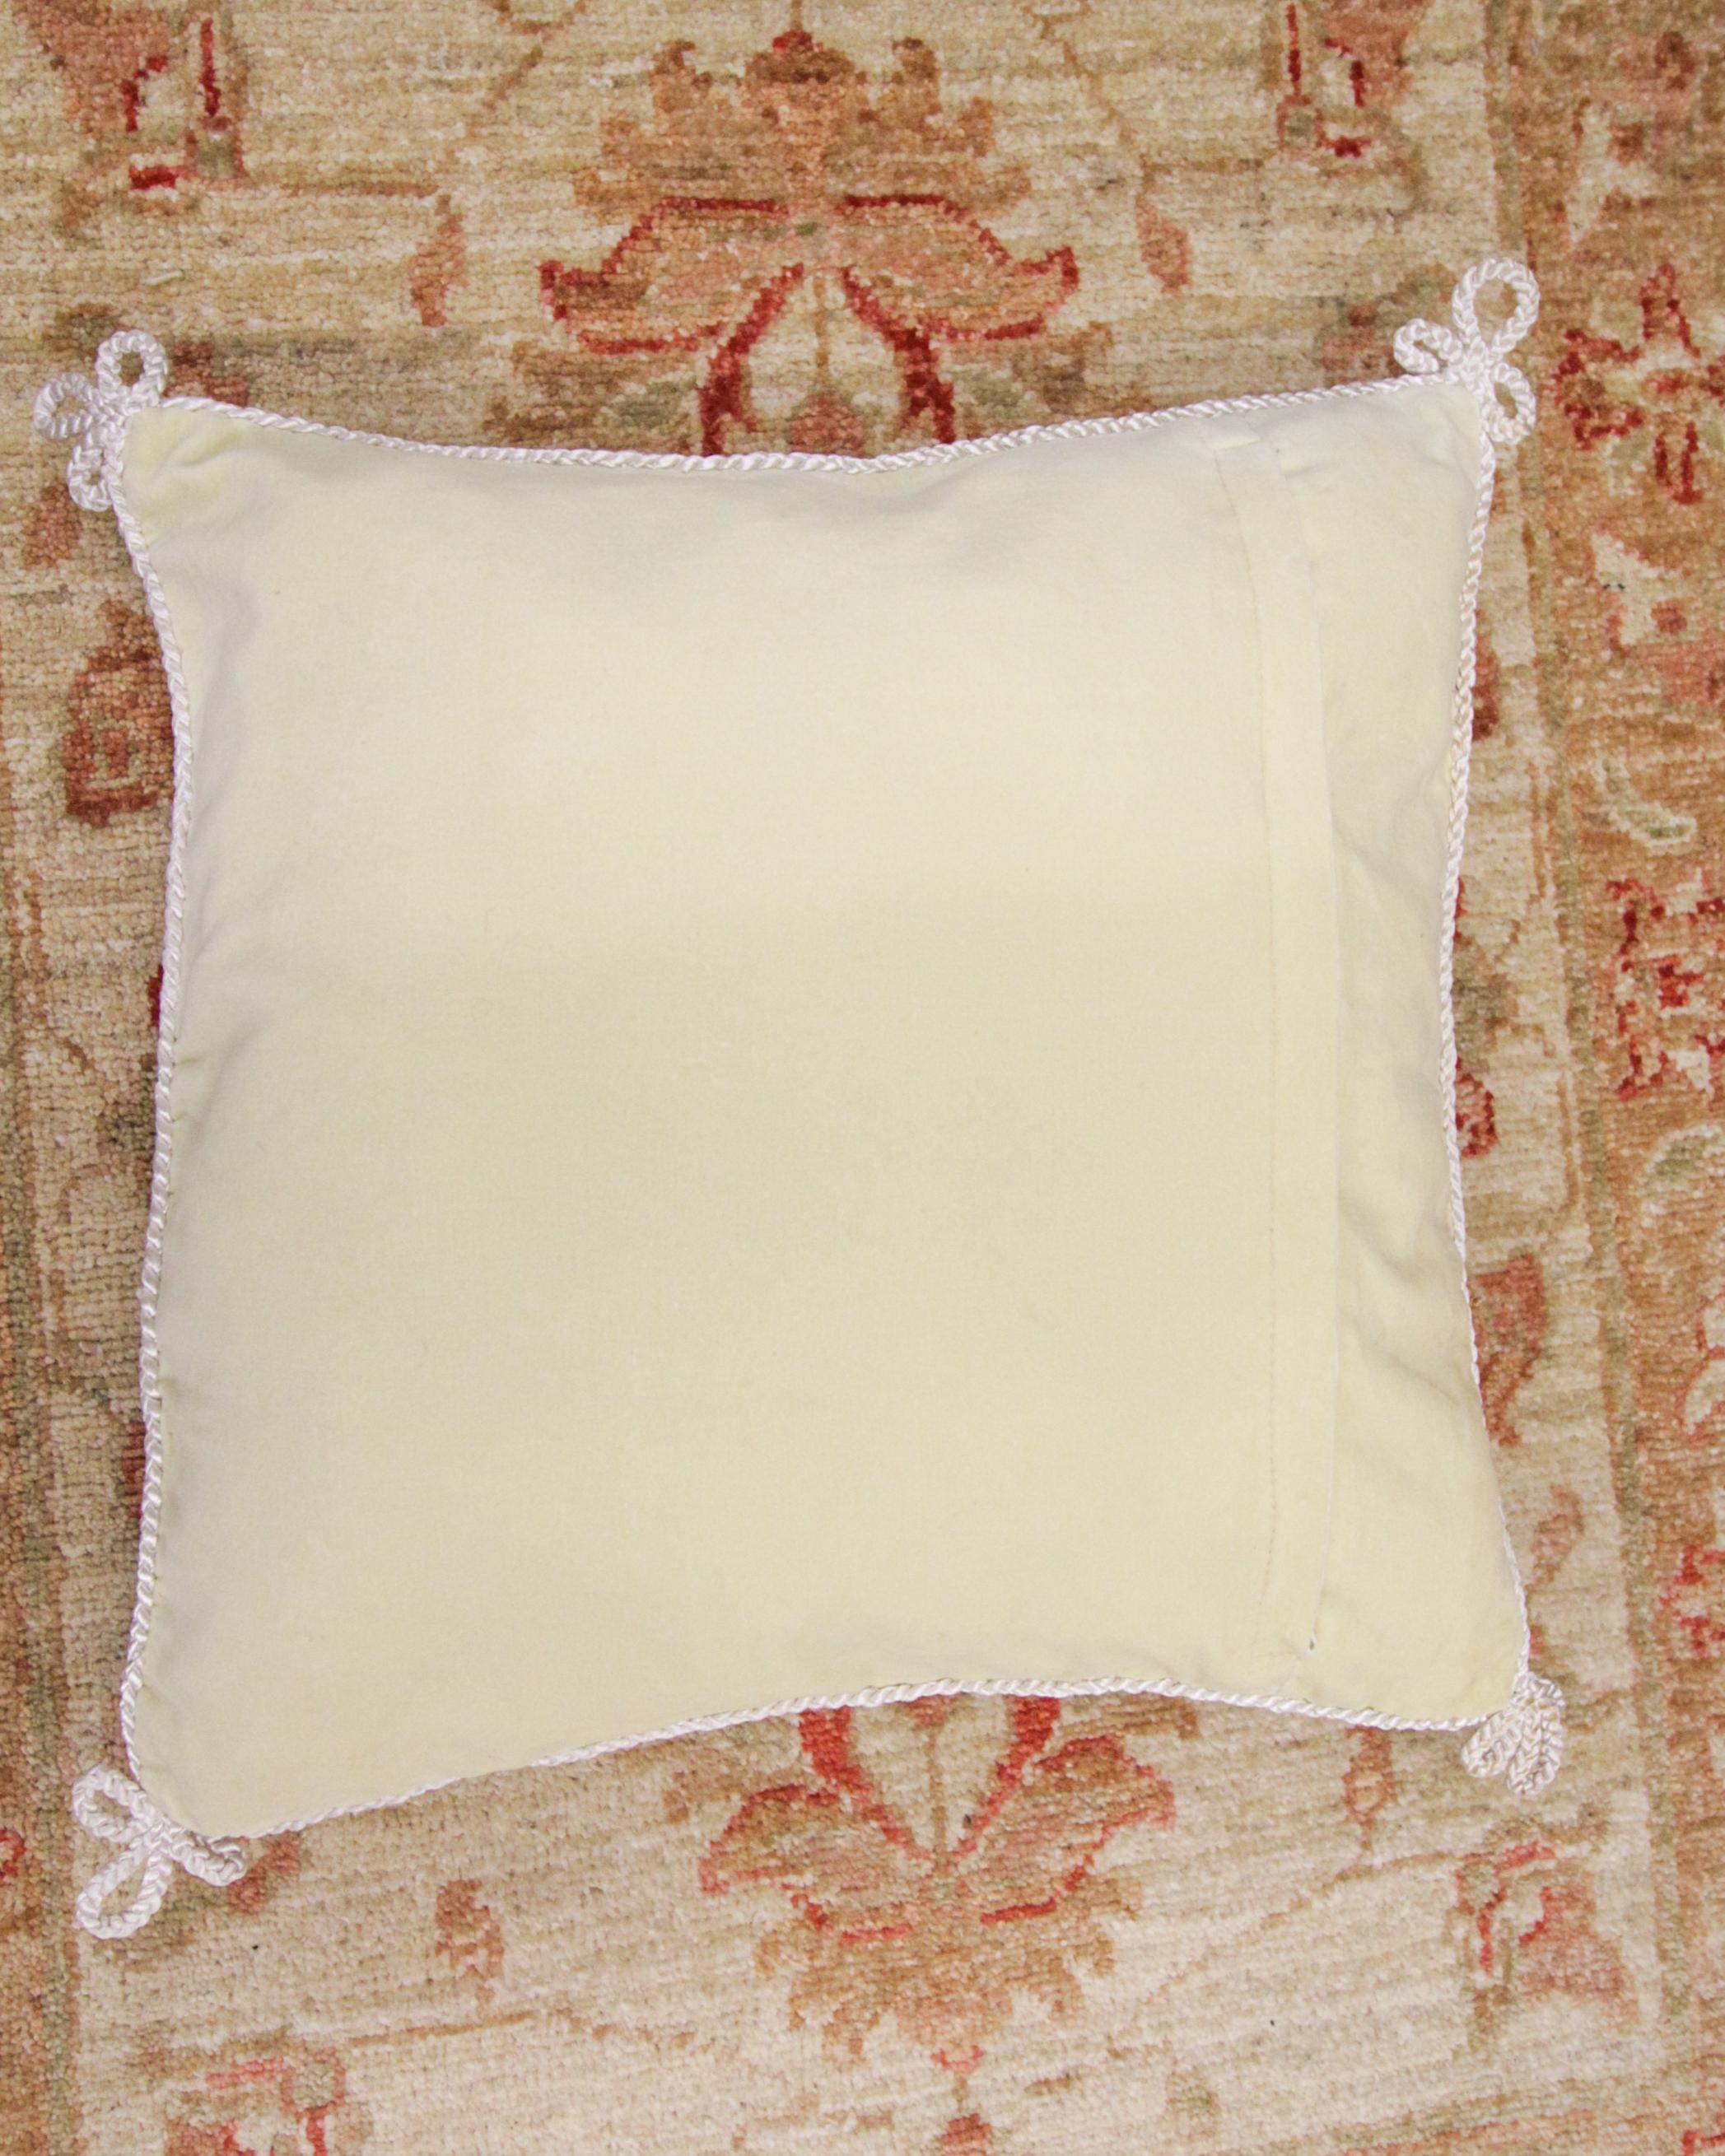 needlepoint pillow covers